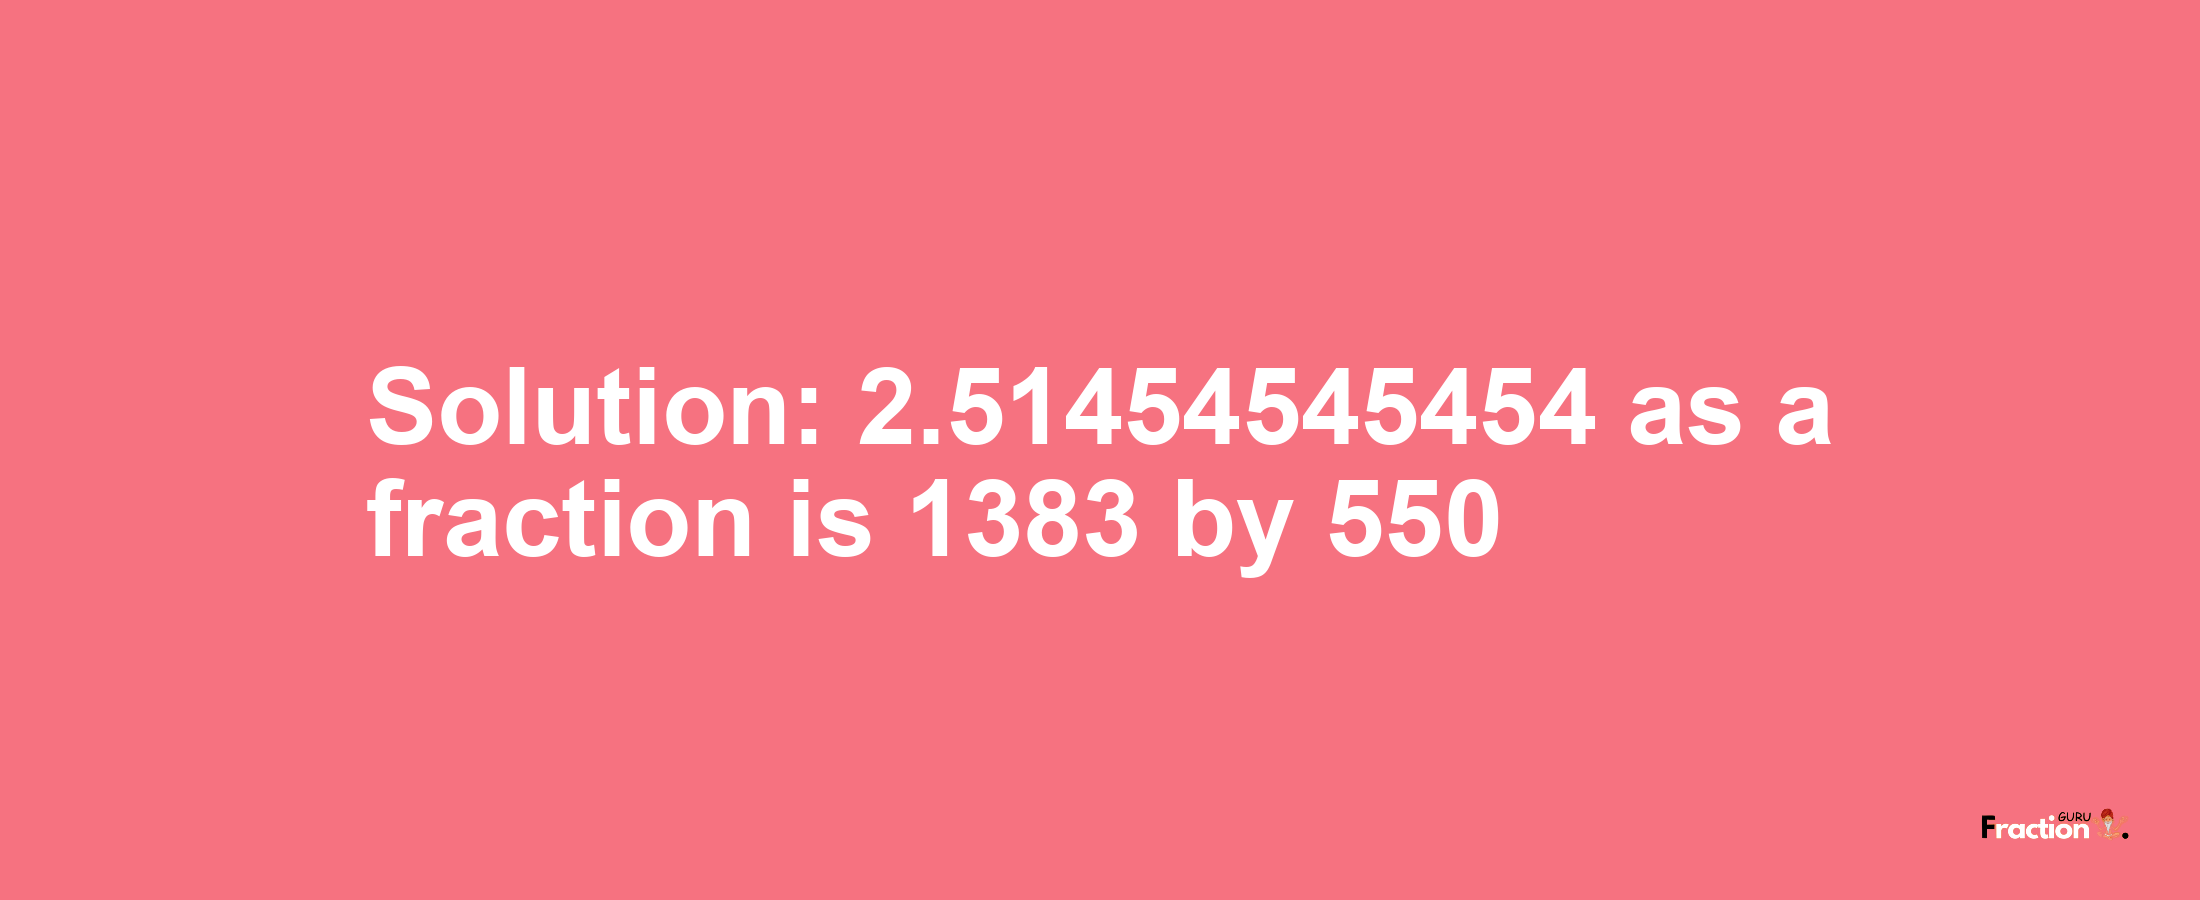 Solution:2.51454545454 as a fraction is 1383/550